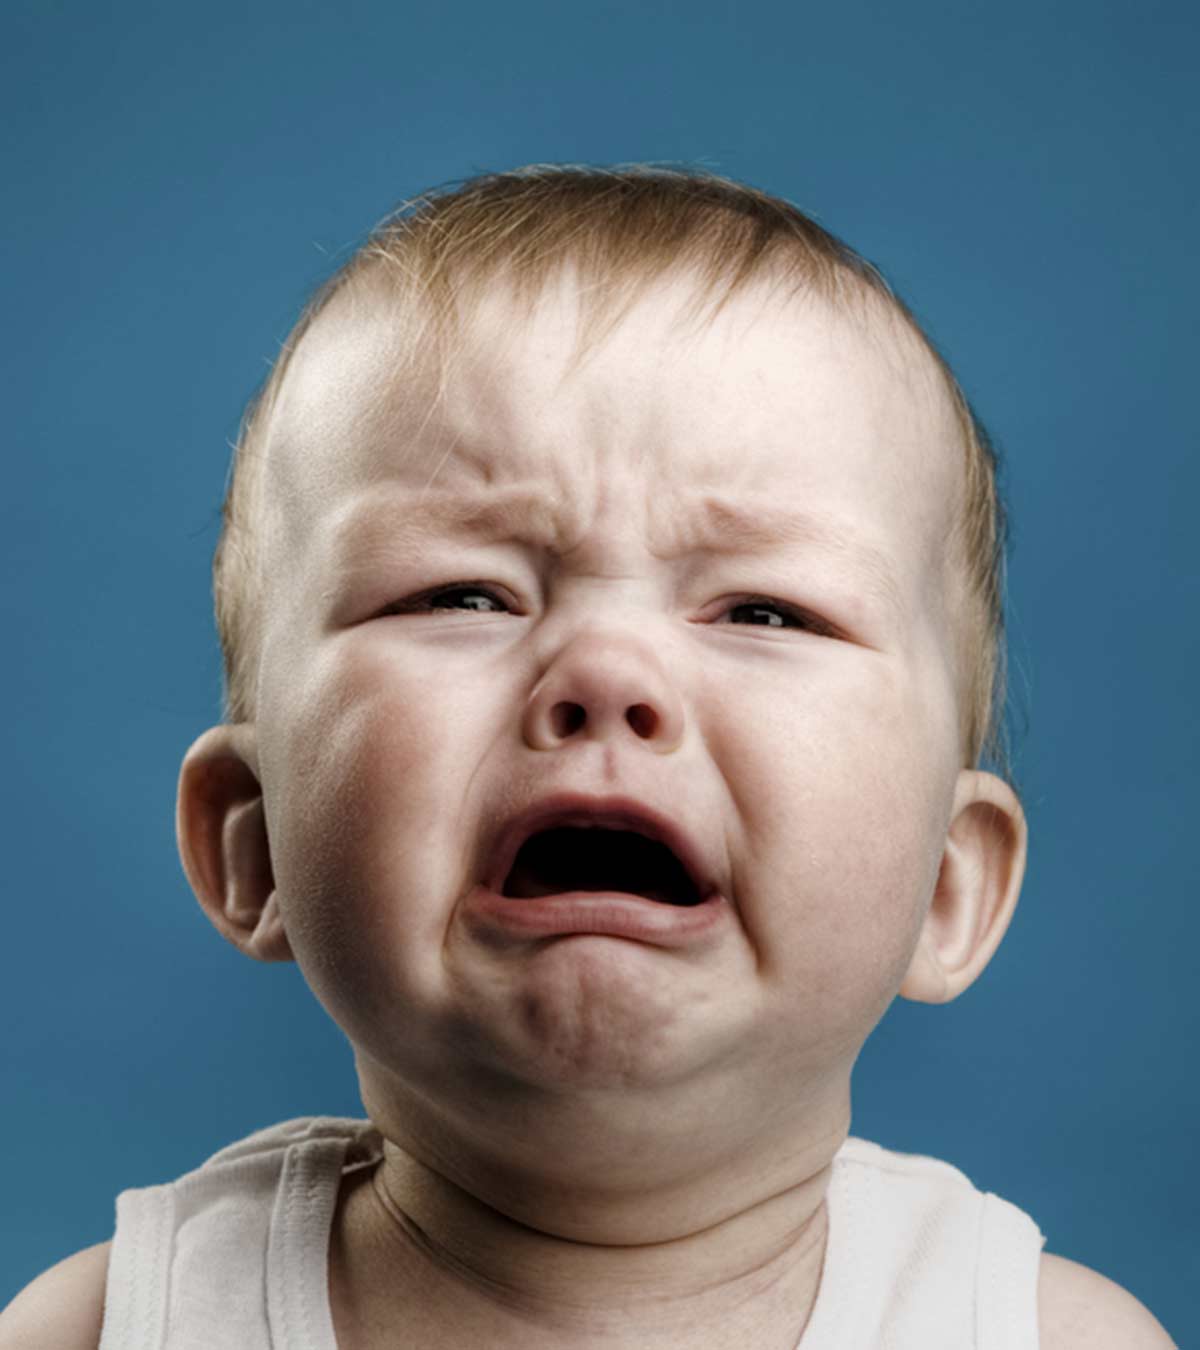 7 Hilarious Reasons Why Babies Cry